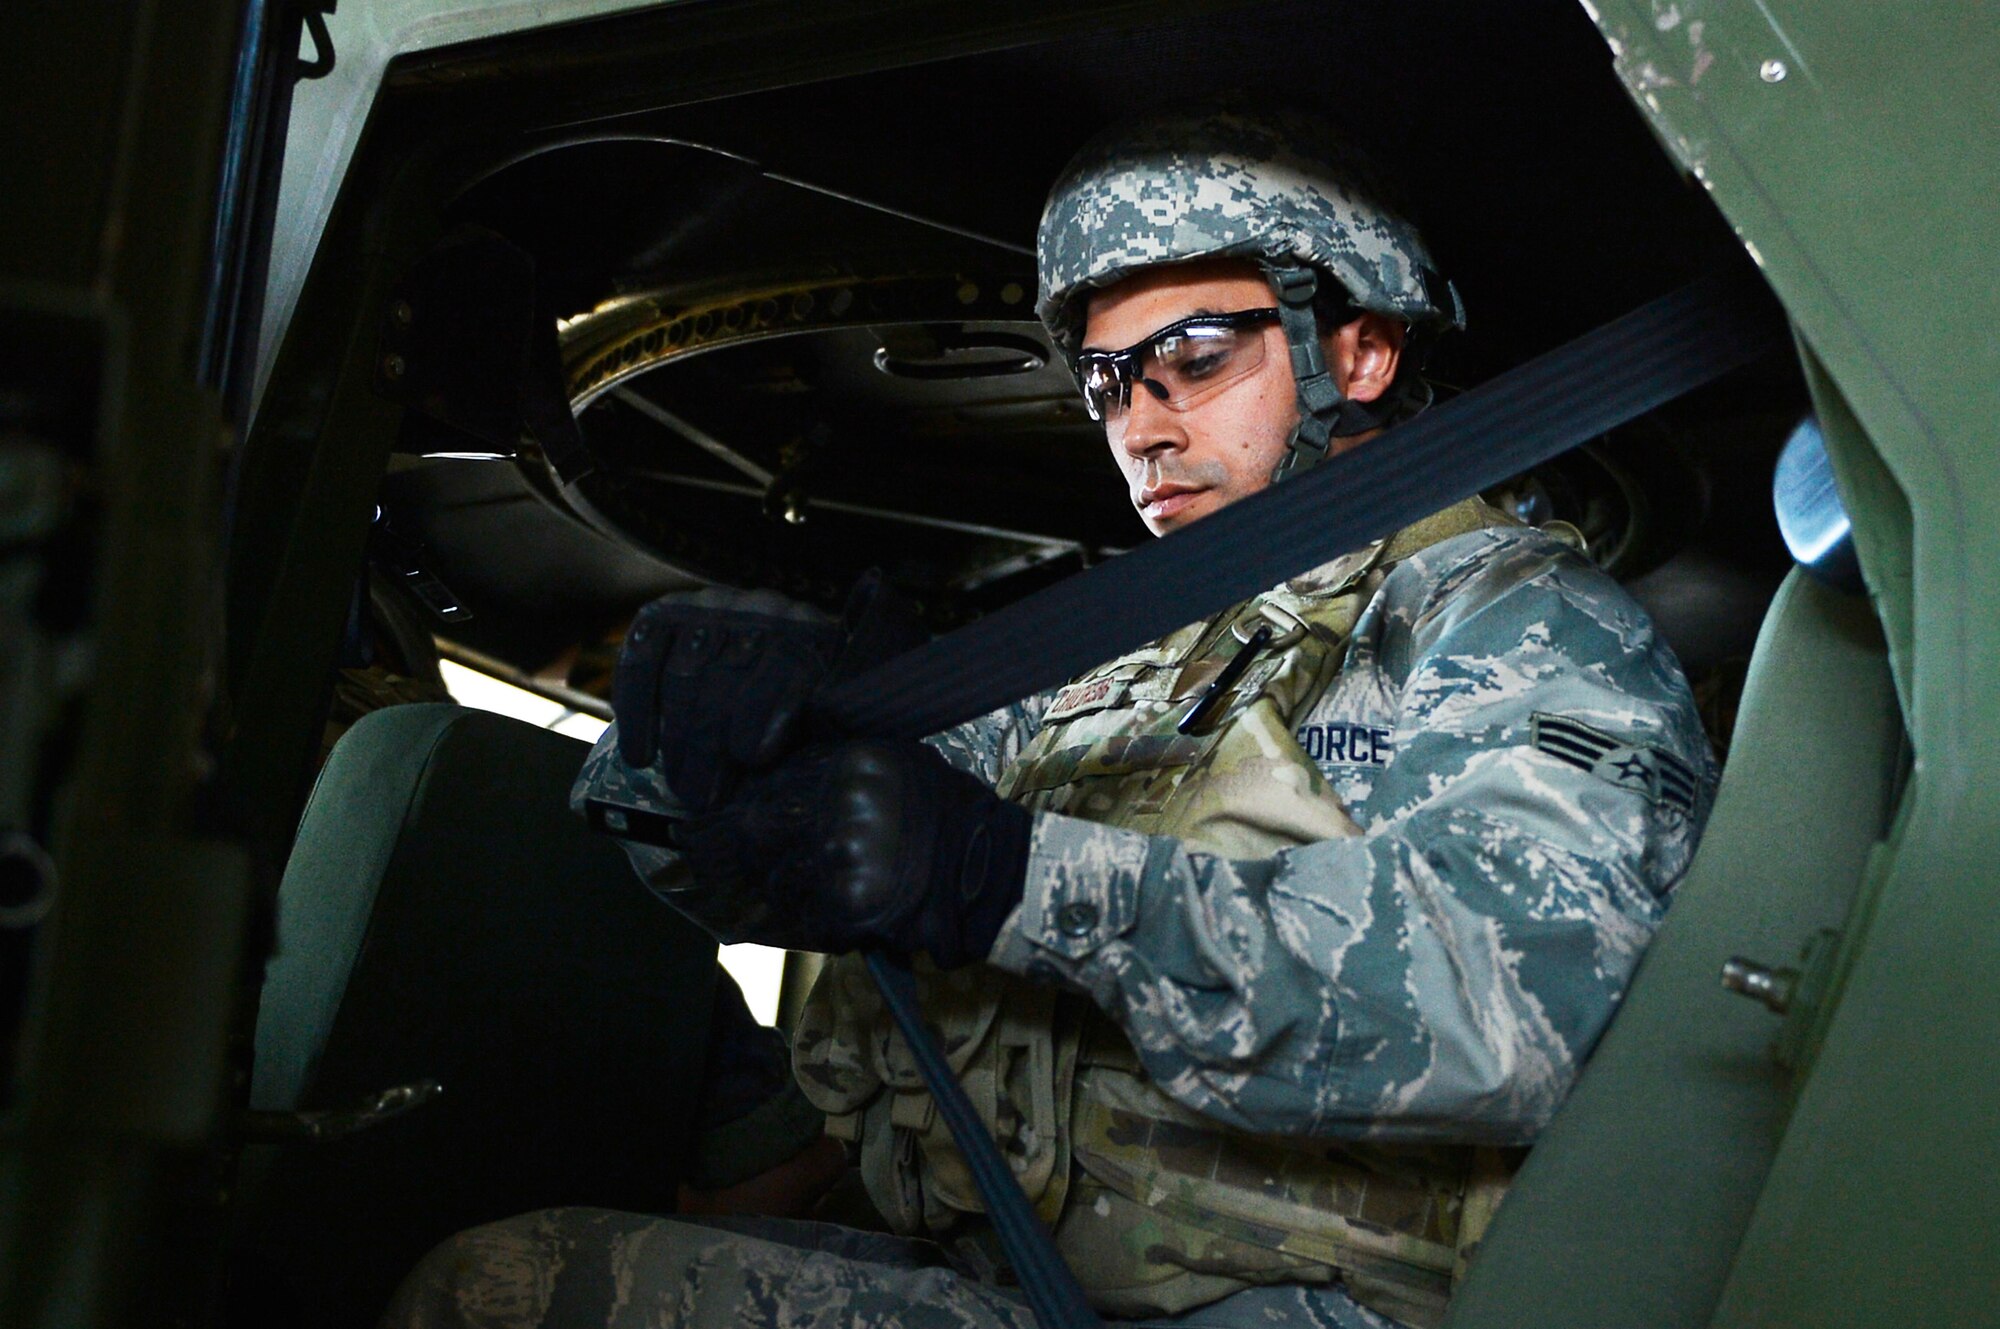 U.S. Air Force Senior Airman Jose Peregrina-Flores, 7th Weather Squadron regional maintenance technician, straps himself to a Humvee egress assistance trainer on Lucius D. Clay Kaserne, Germany, June 14, 2017. The 7th WS conducts HEAT training annually in order to ensure its Airmen are capable of evacuate a rolled-over Humvee. The squadron is responsible for providing weather support to U.S. Army operations in Europe. (U.S. Air Force photo by Airman 1st Class Joshua Magbanua)